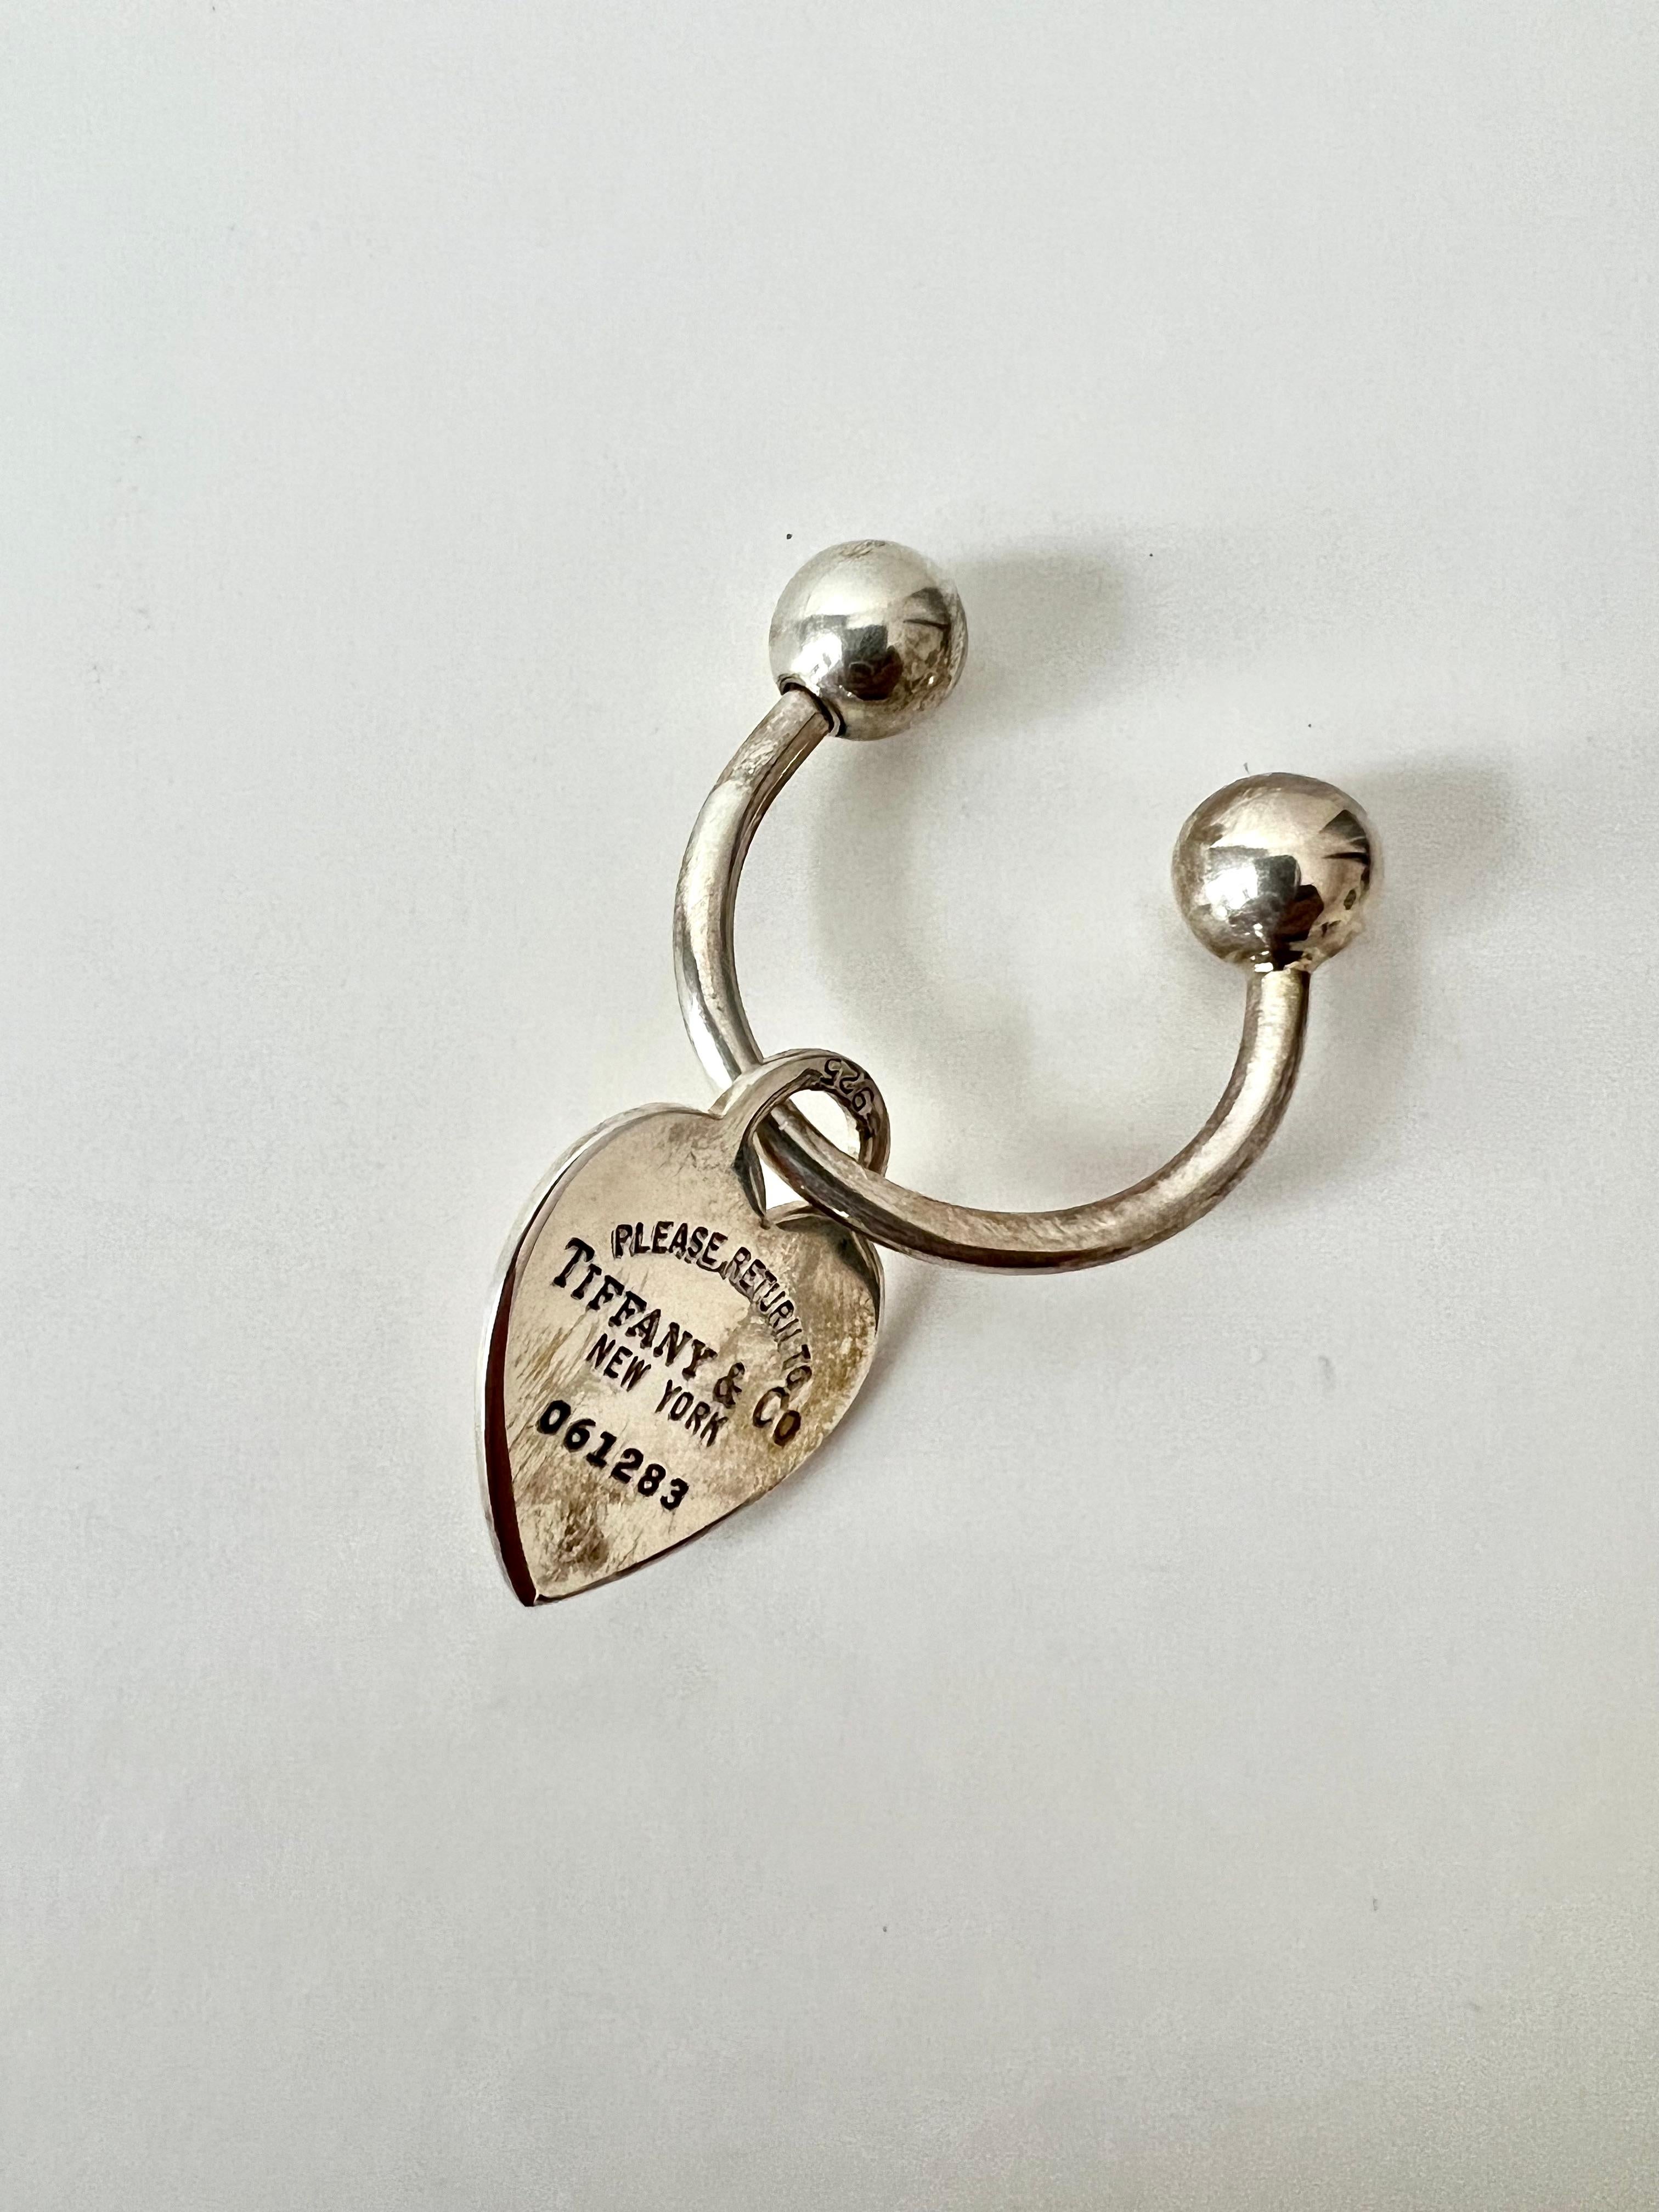 An iconic loop with Ball key chain in Sterling Silver - the piece comes with a sterling heart with return address, if lost, with serial number.  This piece has been engraved PS, which could be removed - 

The two ends are sterling balls, one of